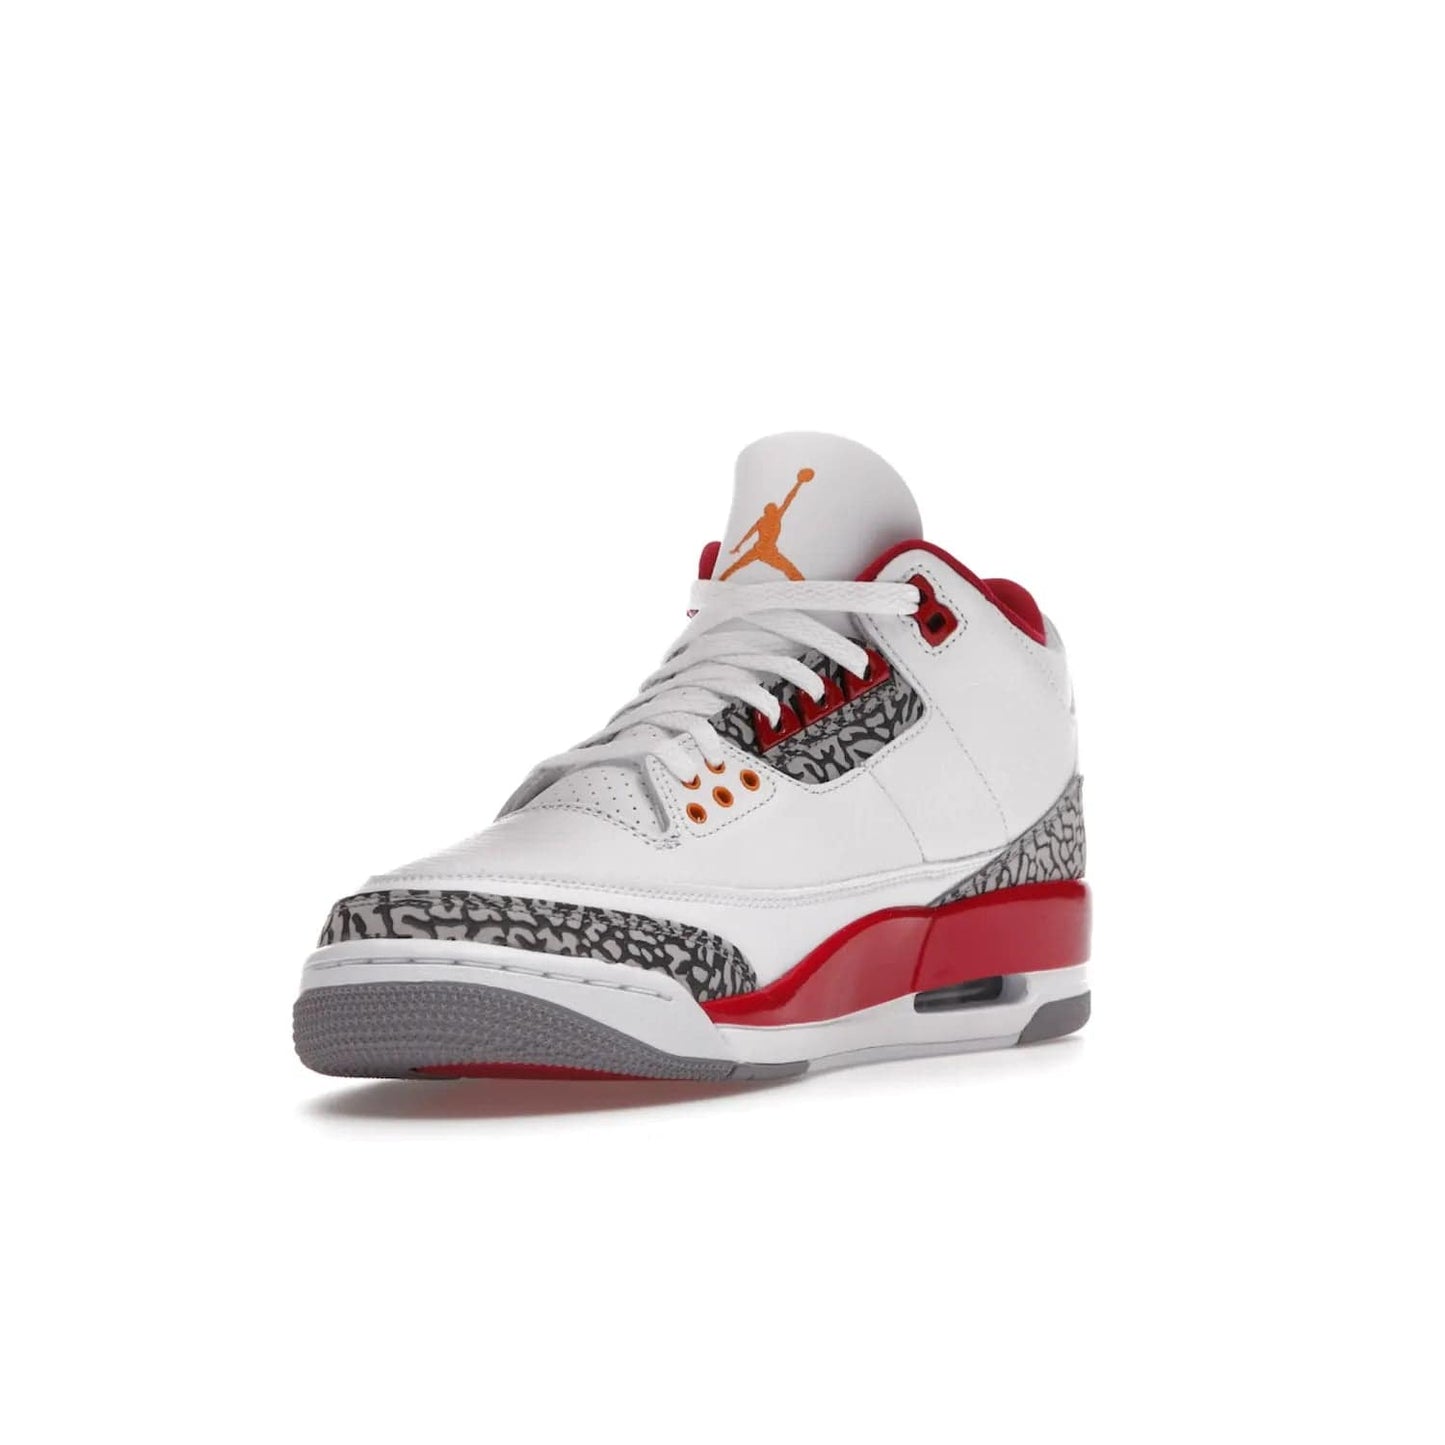 Jordan 3 Retro Cardinal Red - Image 14 - Only at www.BallersClubKickz.com - Air Jordan 3 Retro Cardinal Red combines classic style and modern appeal - white tumbled leather, signature Elephant Print overlays, cardinal red midsoles, Jumpman logo embroidery. Available Feb 2022.